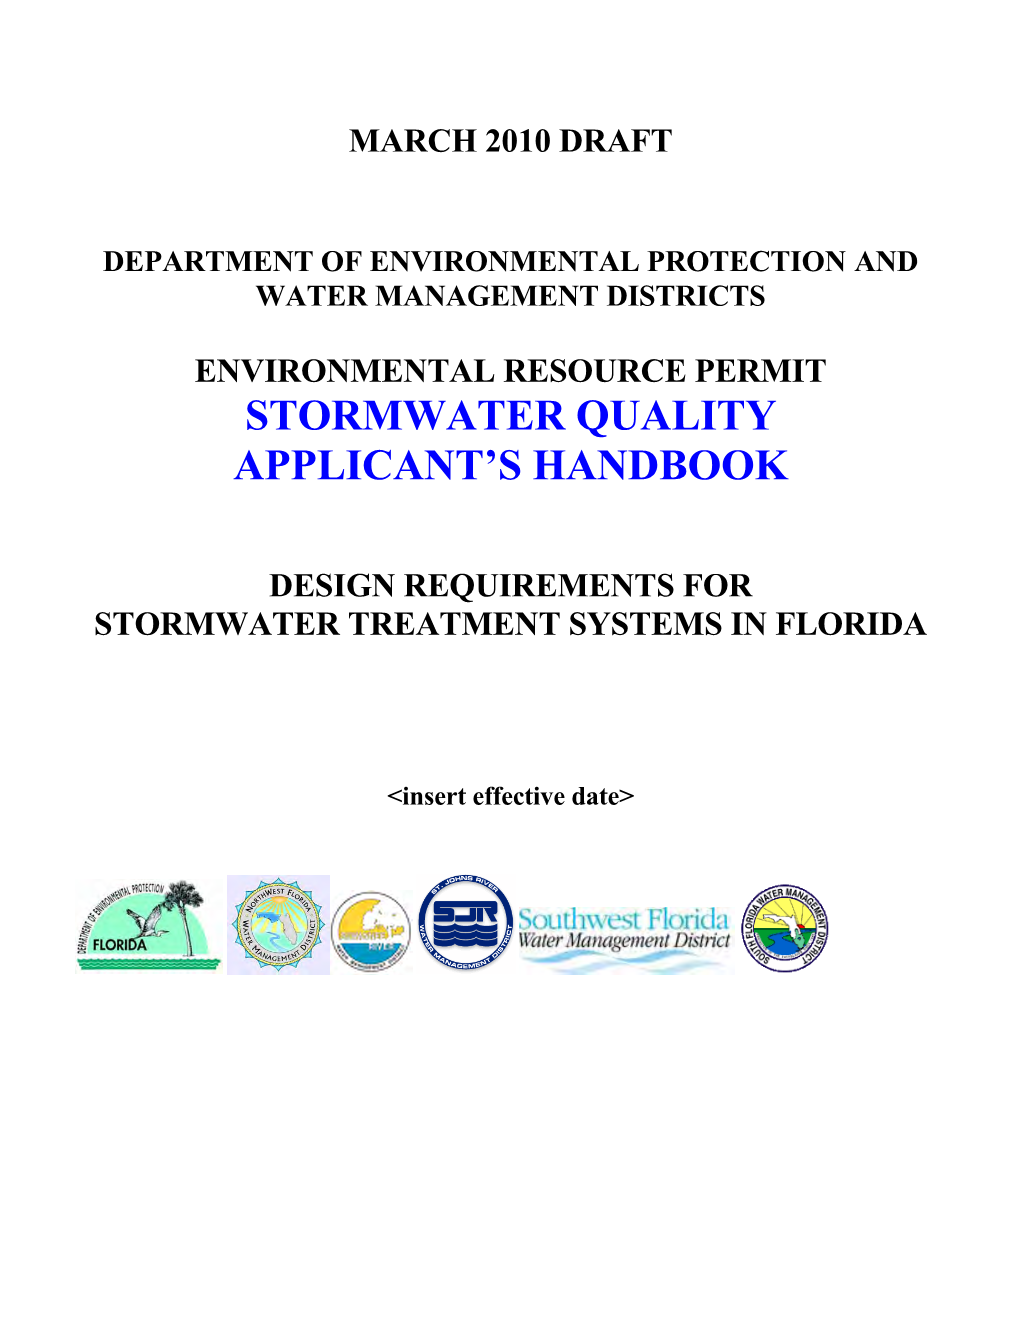 Stormwater Quality Applicant's Handbook